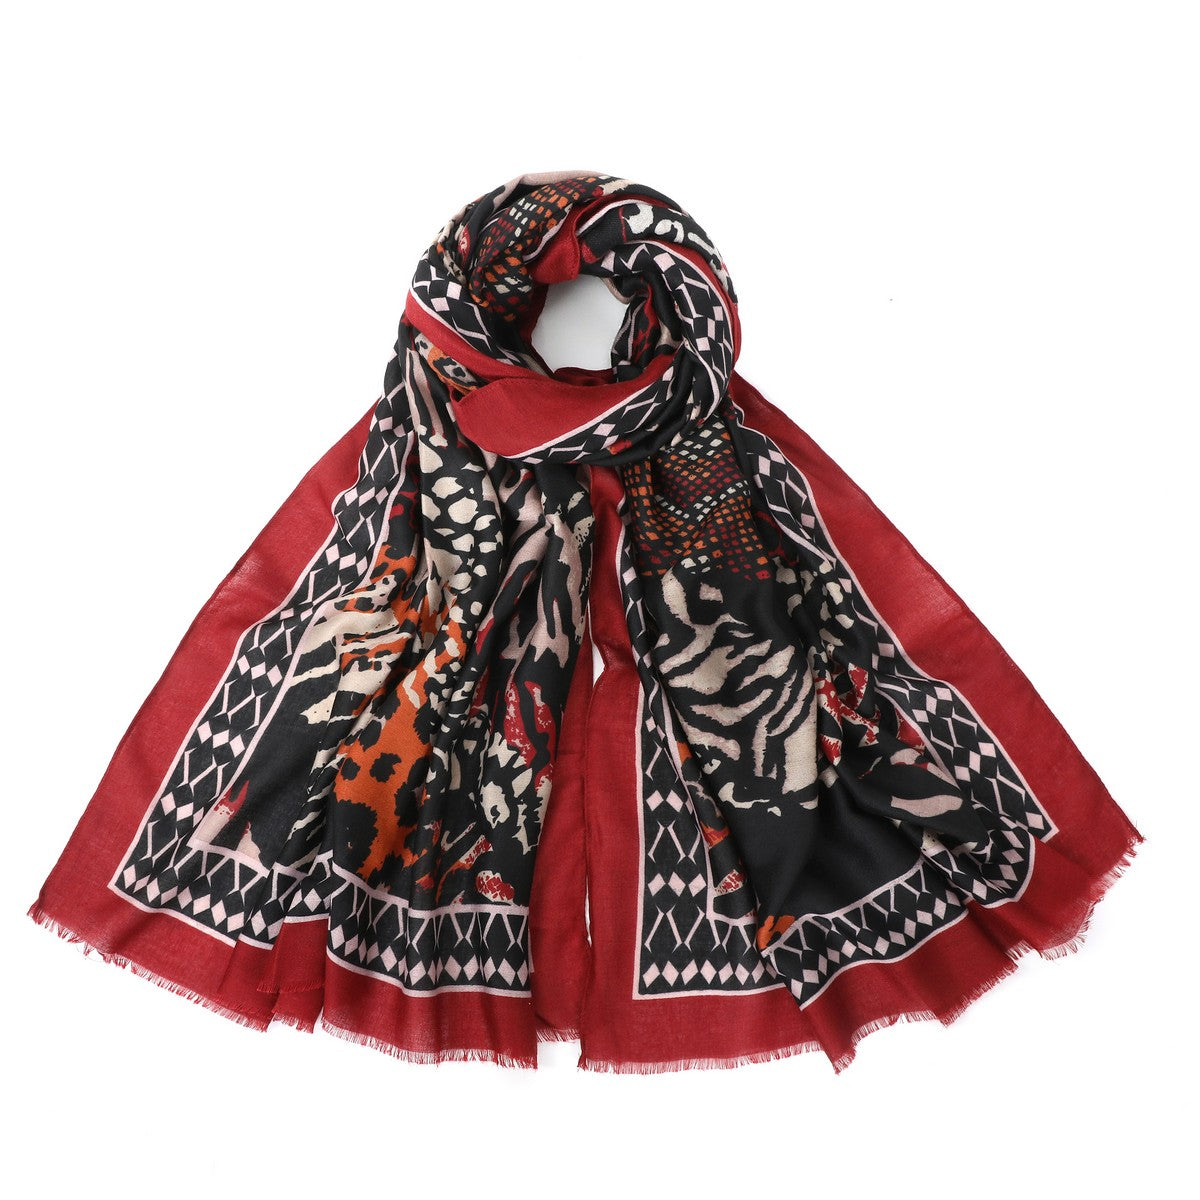 Mixed Print Fashion Scarf - Red YF22510RED